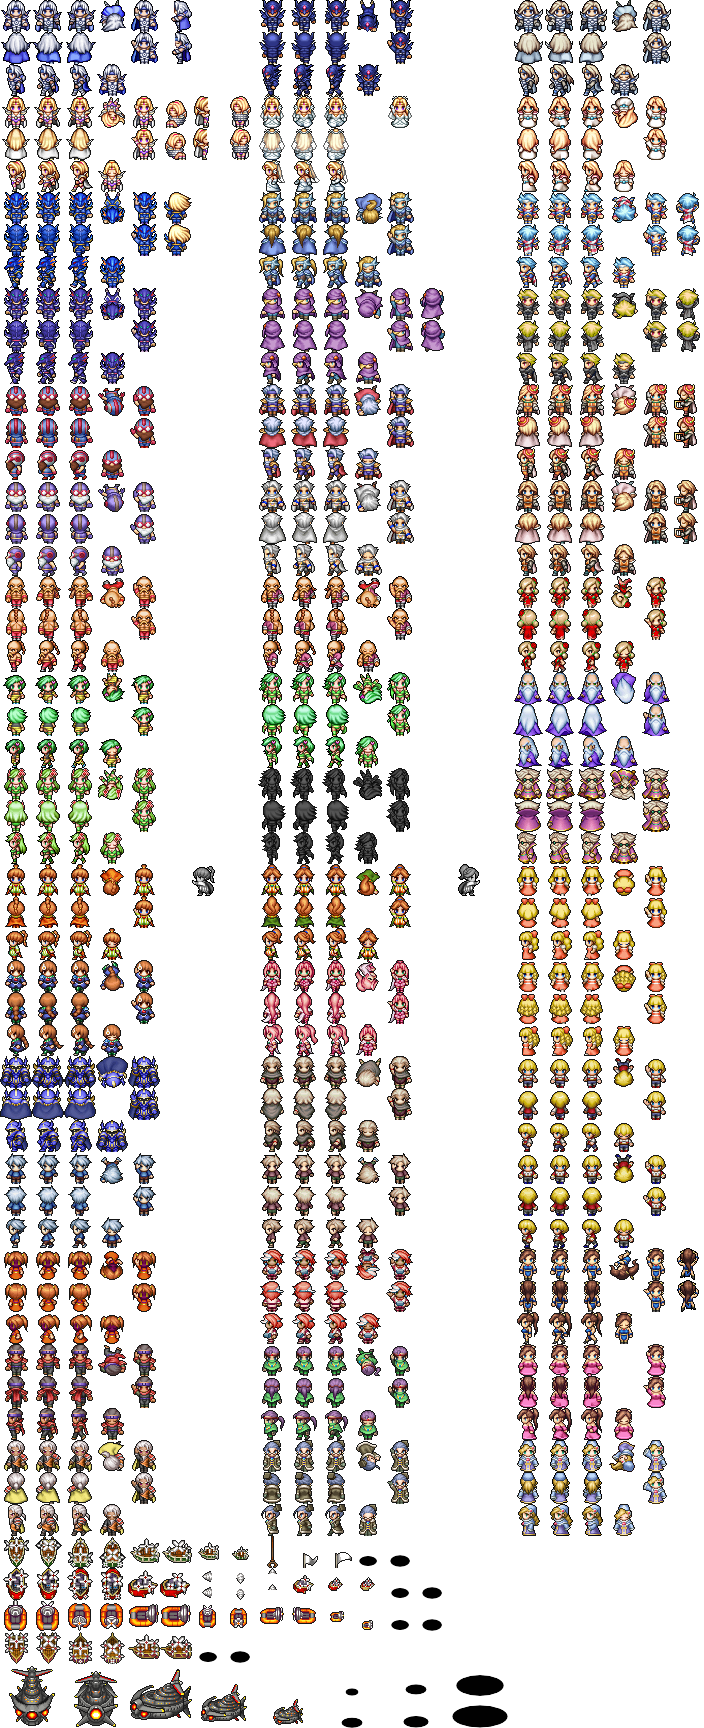 Final Fantasy 4: The Complete Collection - Main Characters (Overworld)